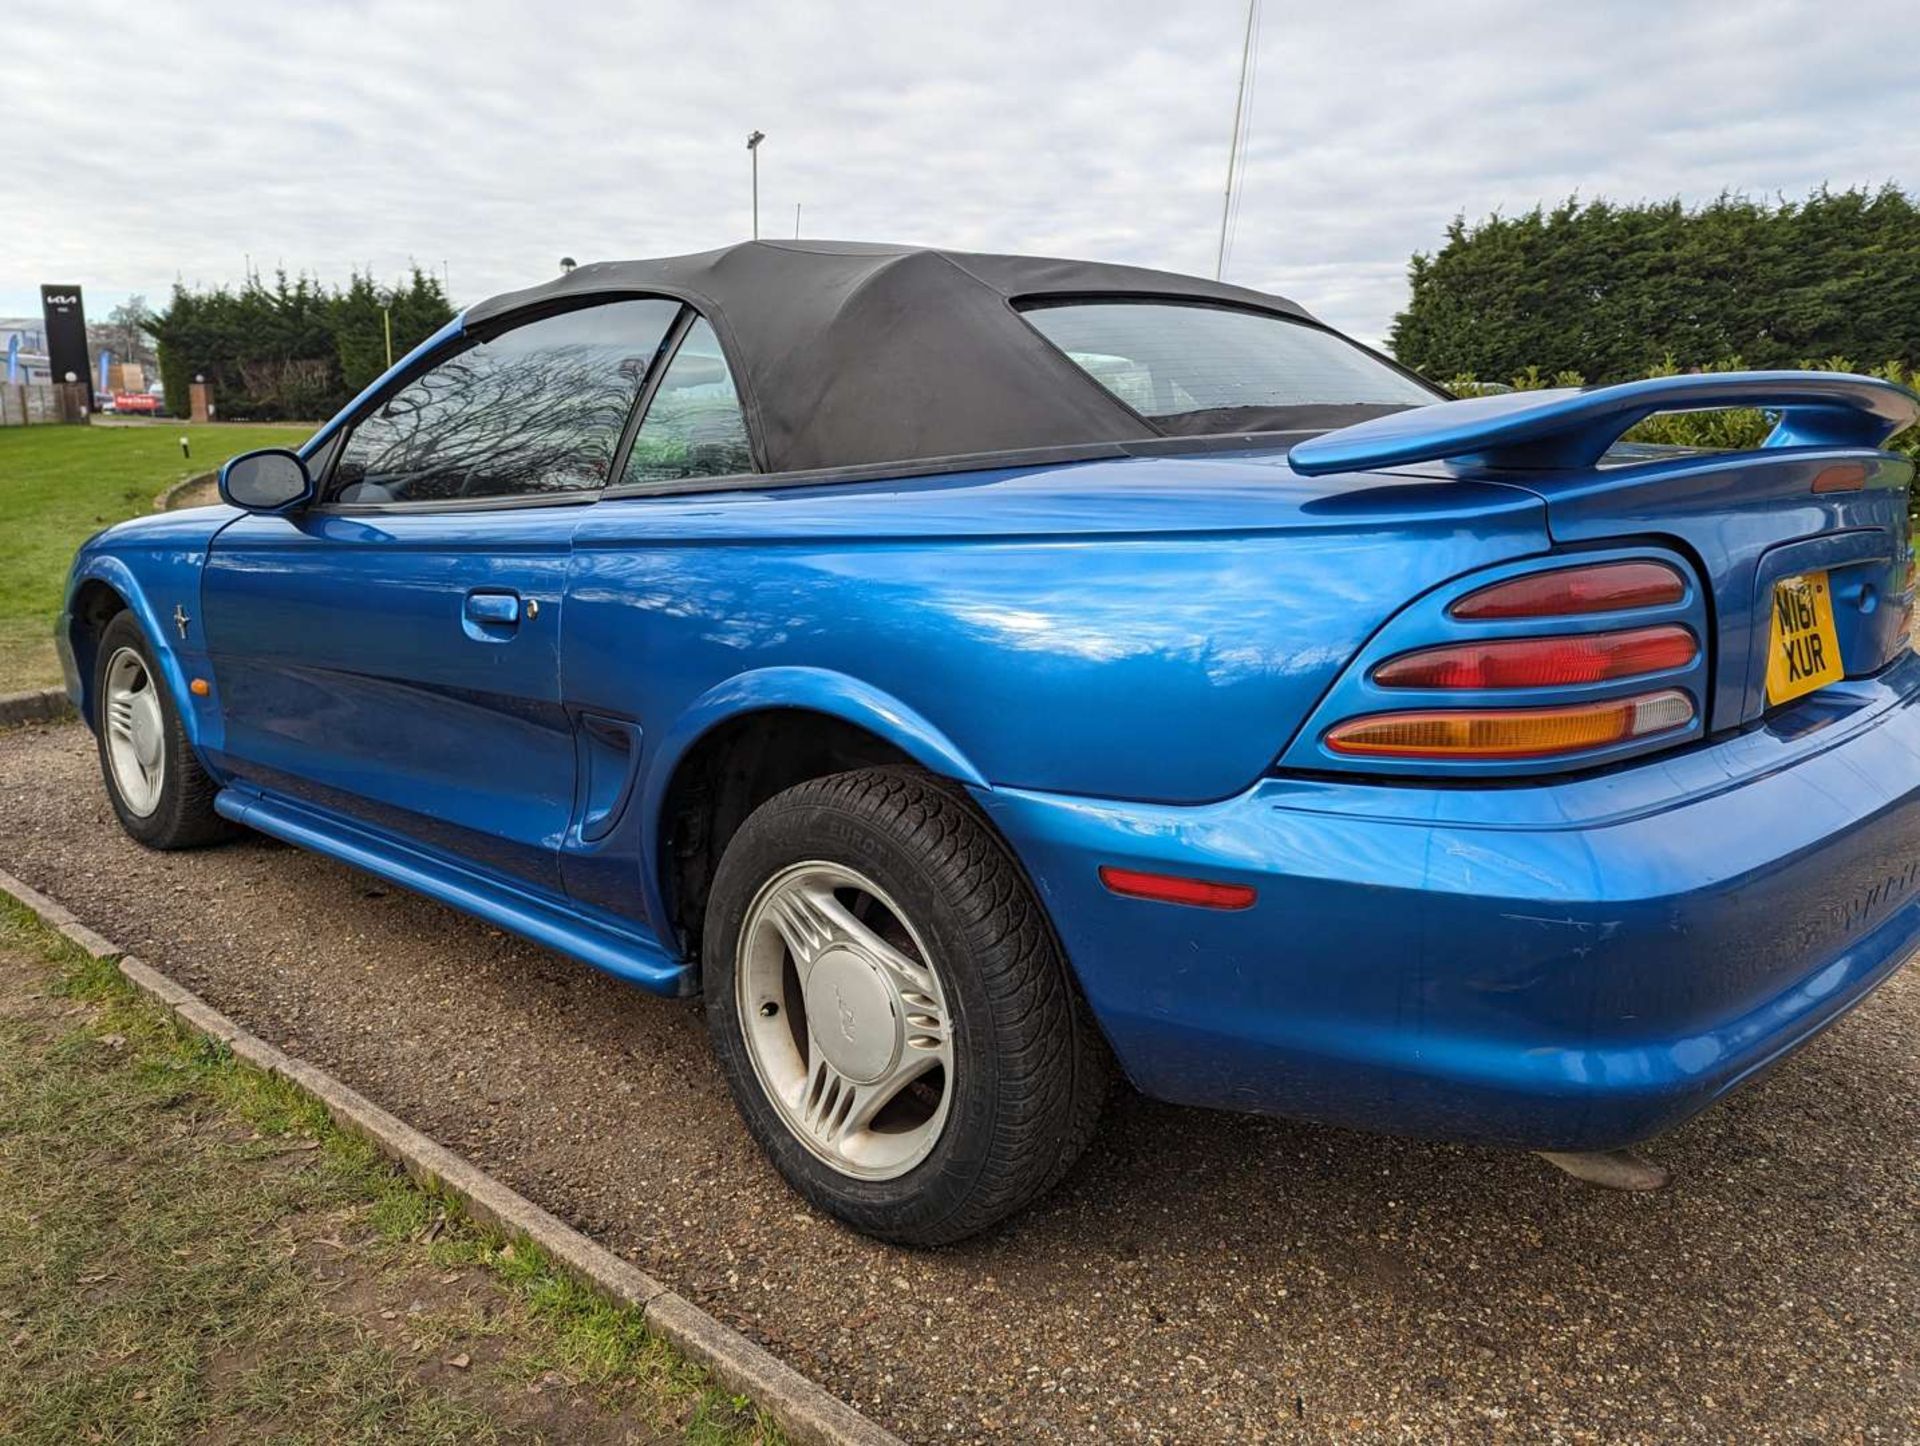 1994 FORD MUSTANG 3.8 CONVERTIBLE LHD - Image 11 of 29